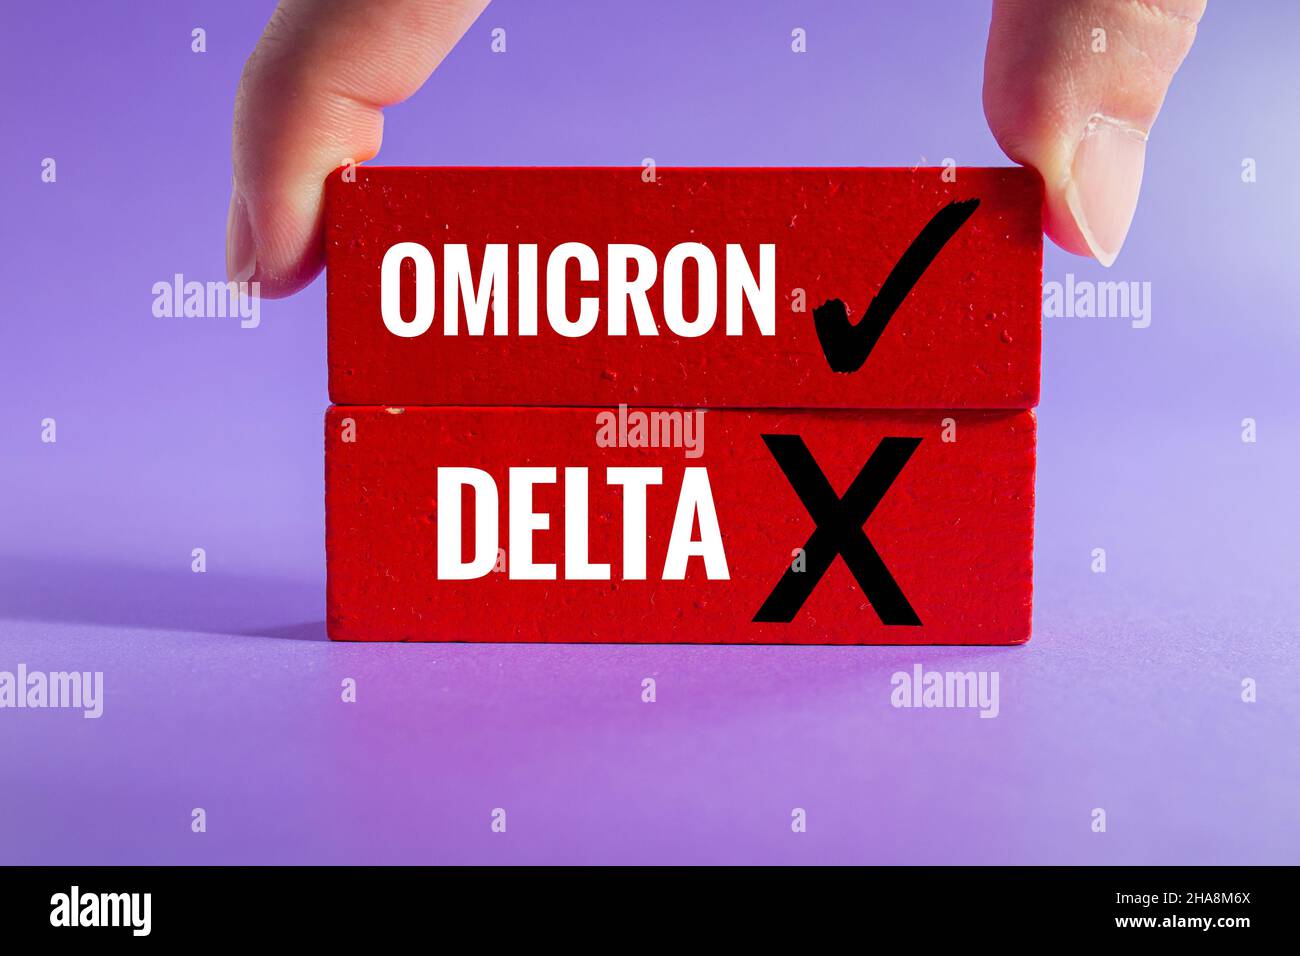 Covid-19 Omicron variant concept, hand adds wooden block to stack. Delta variant out, Omicron in. Stock Photo